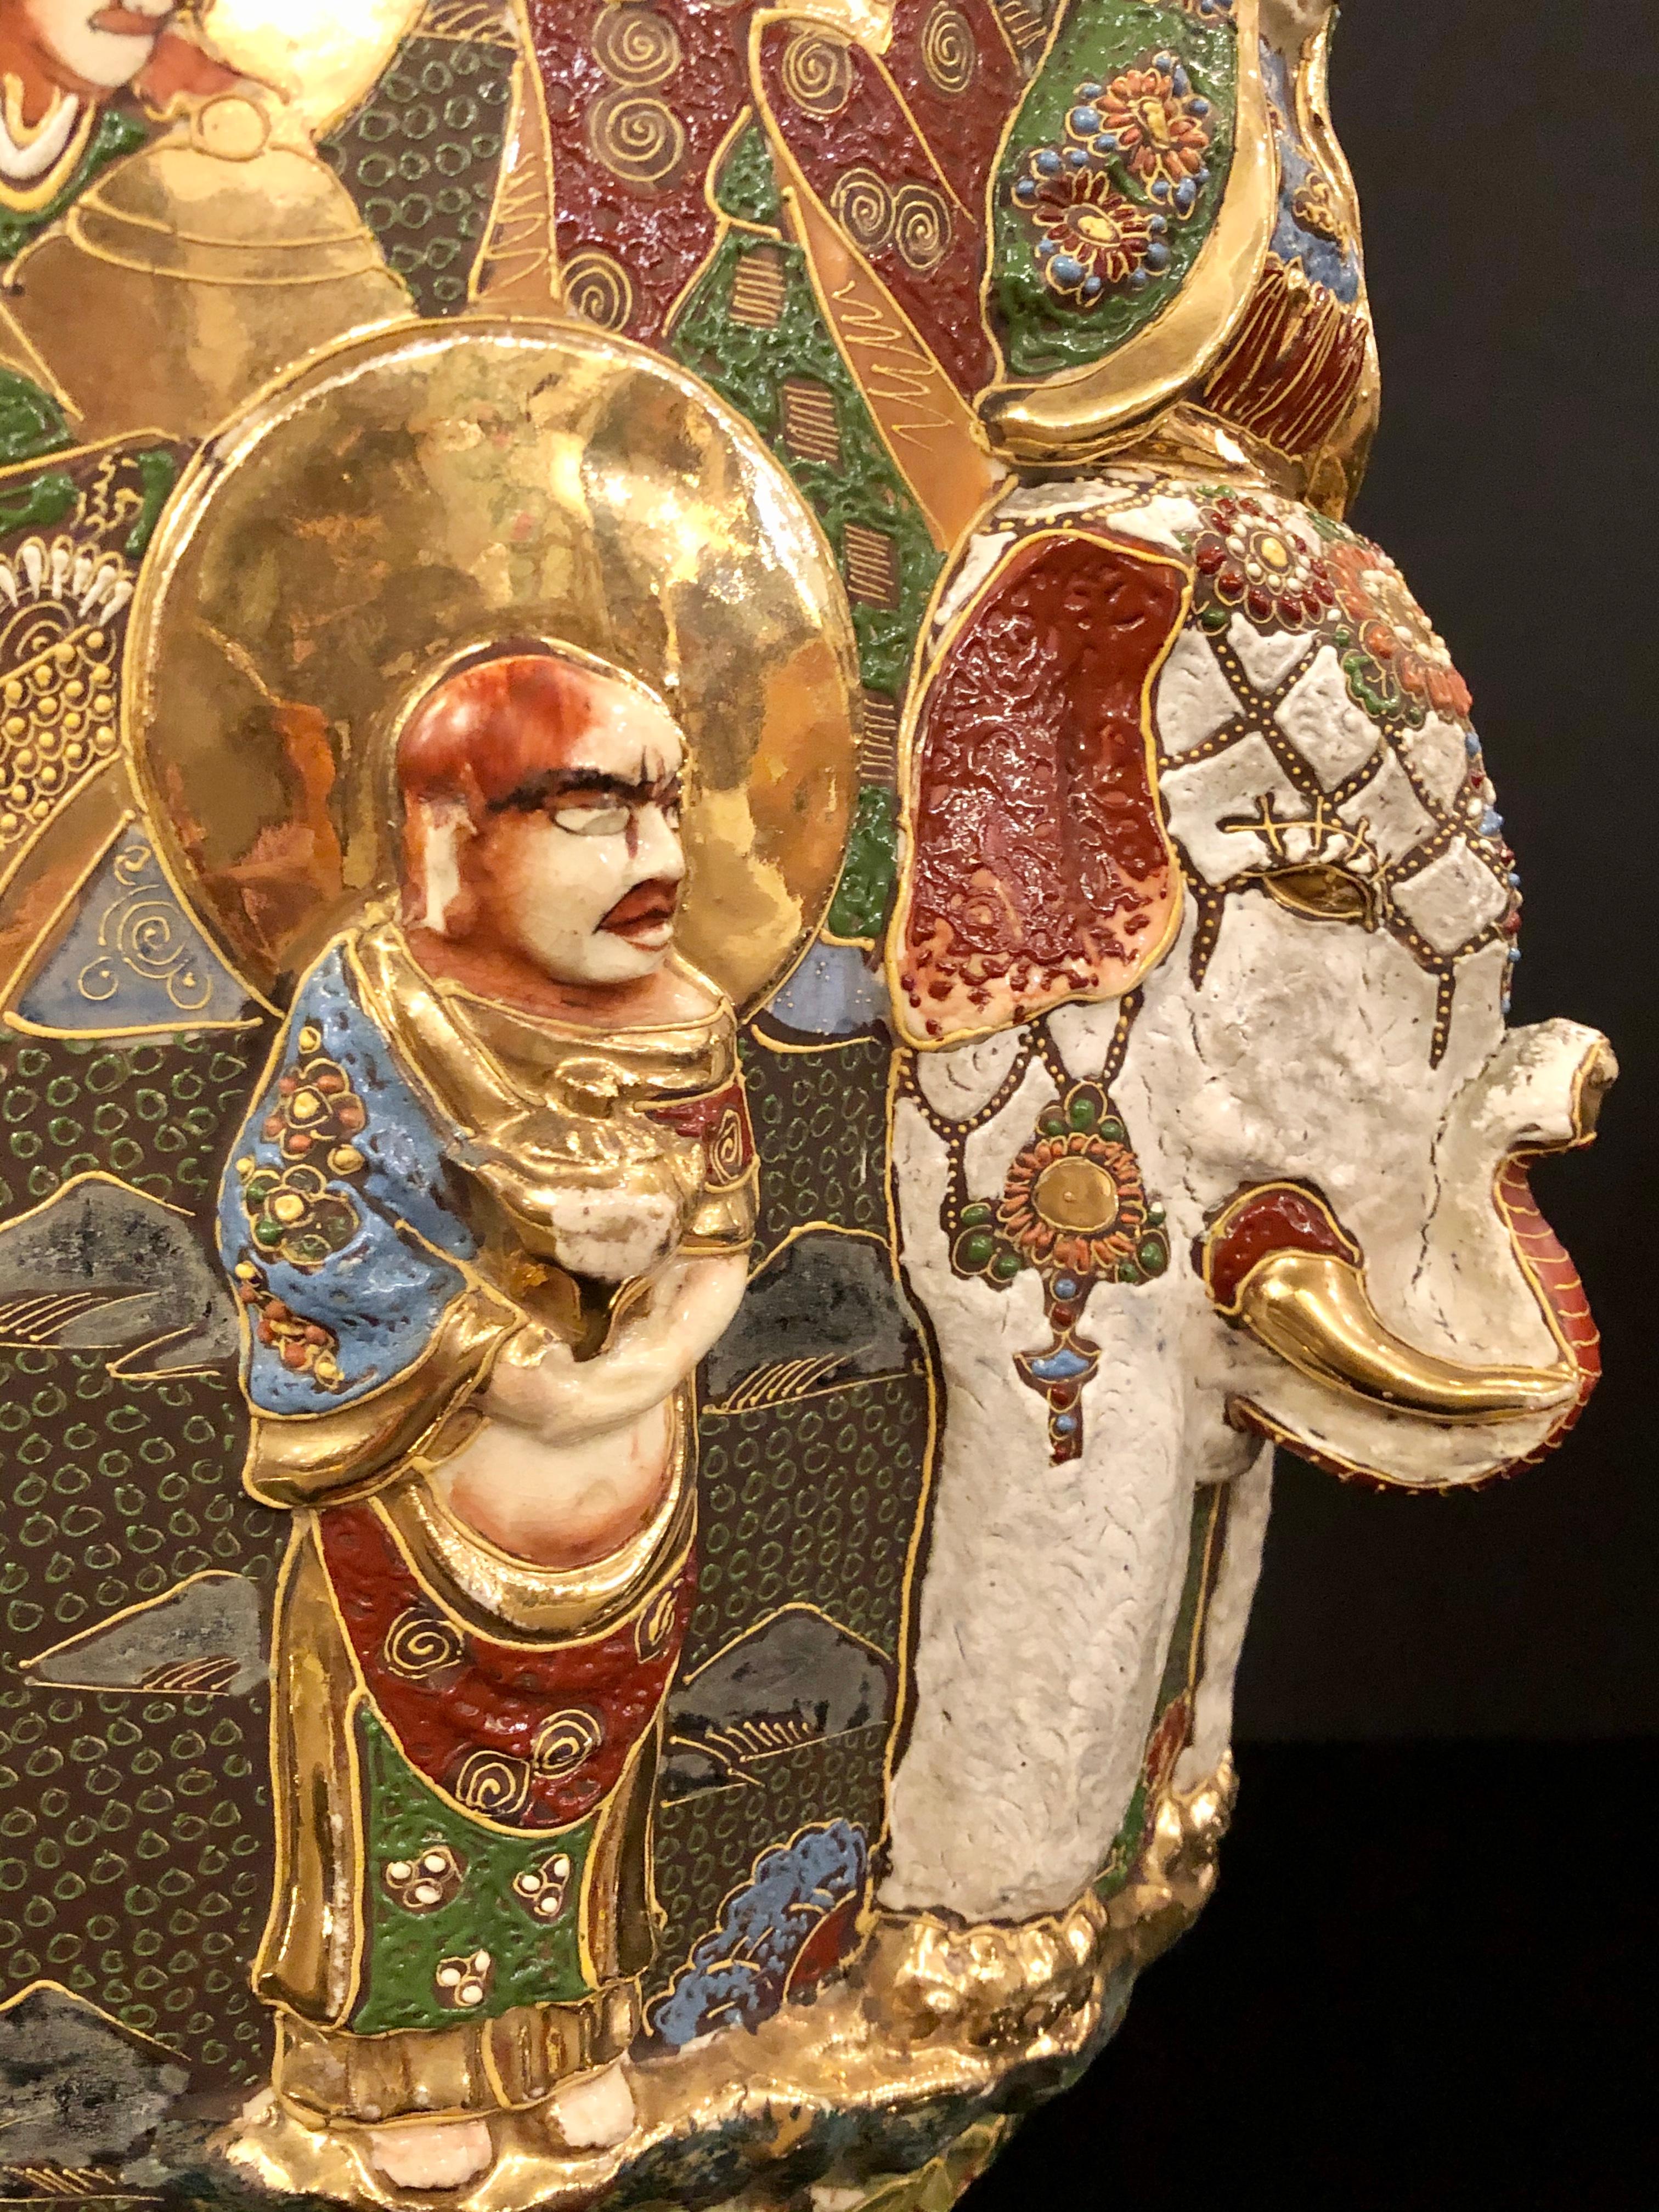 20th Century Japanese Satsuma Vase with Gold Gilt High Relief Decoration Depicting a Goddess